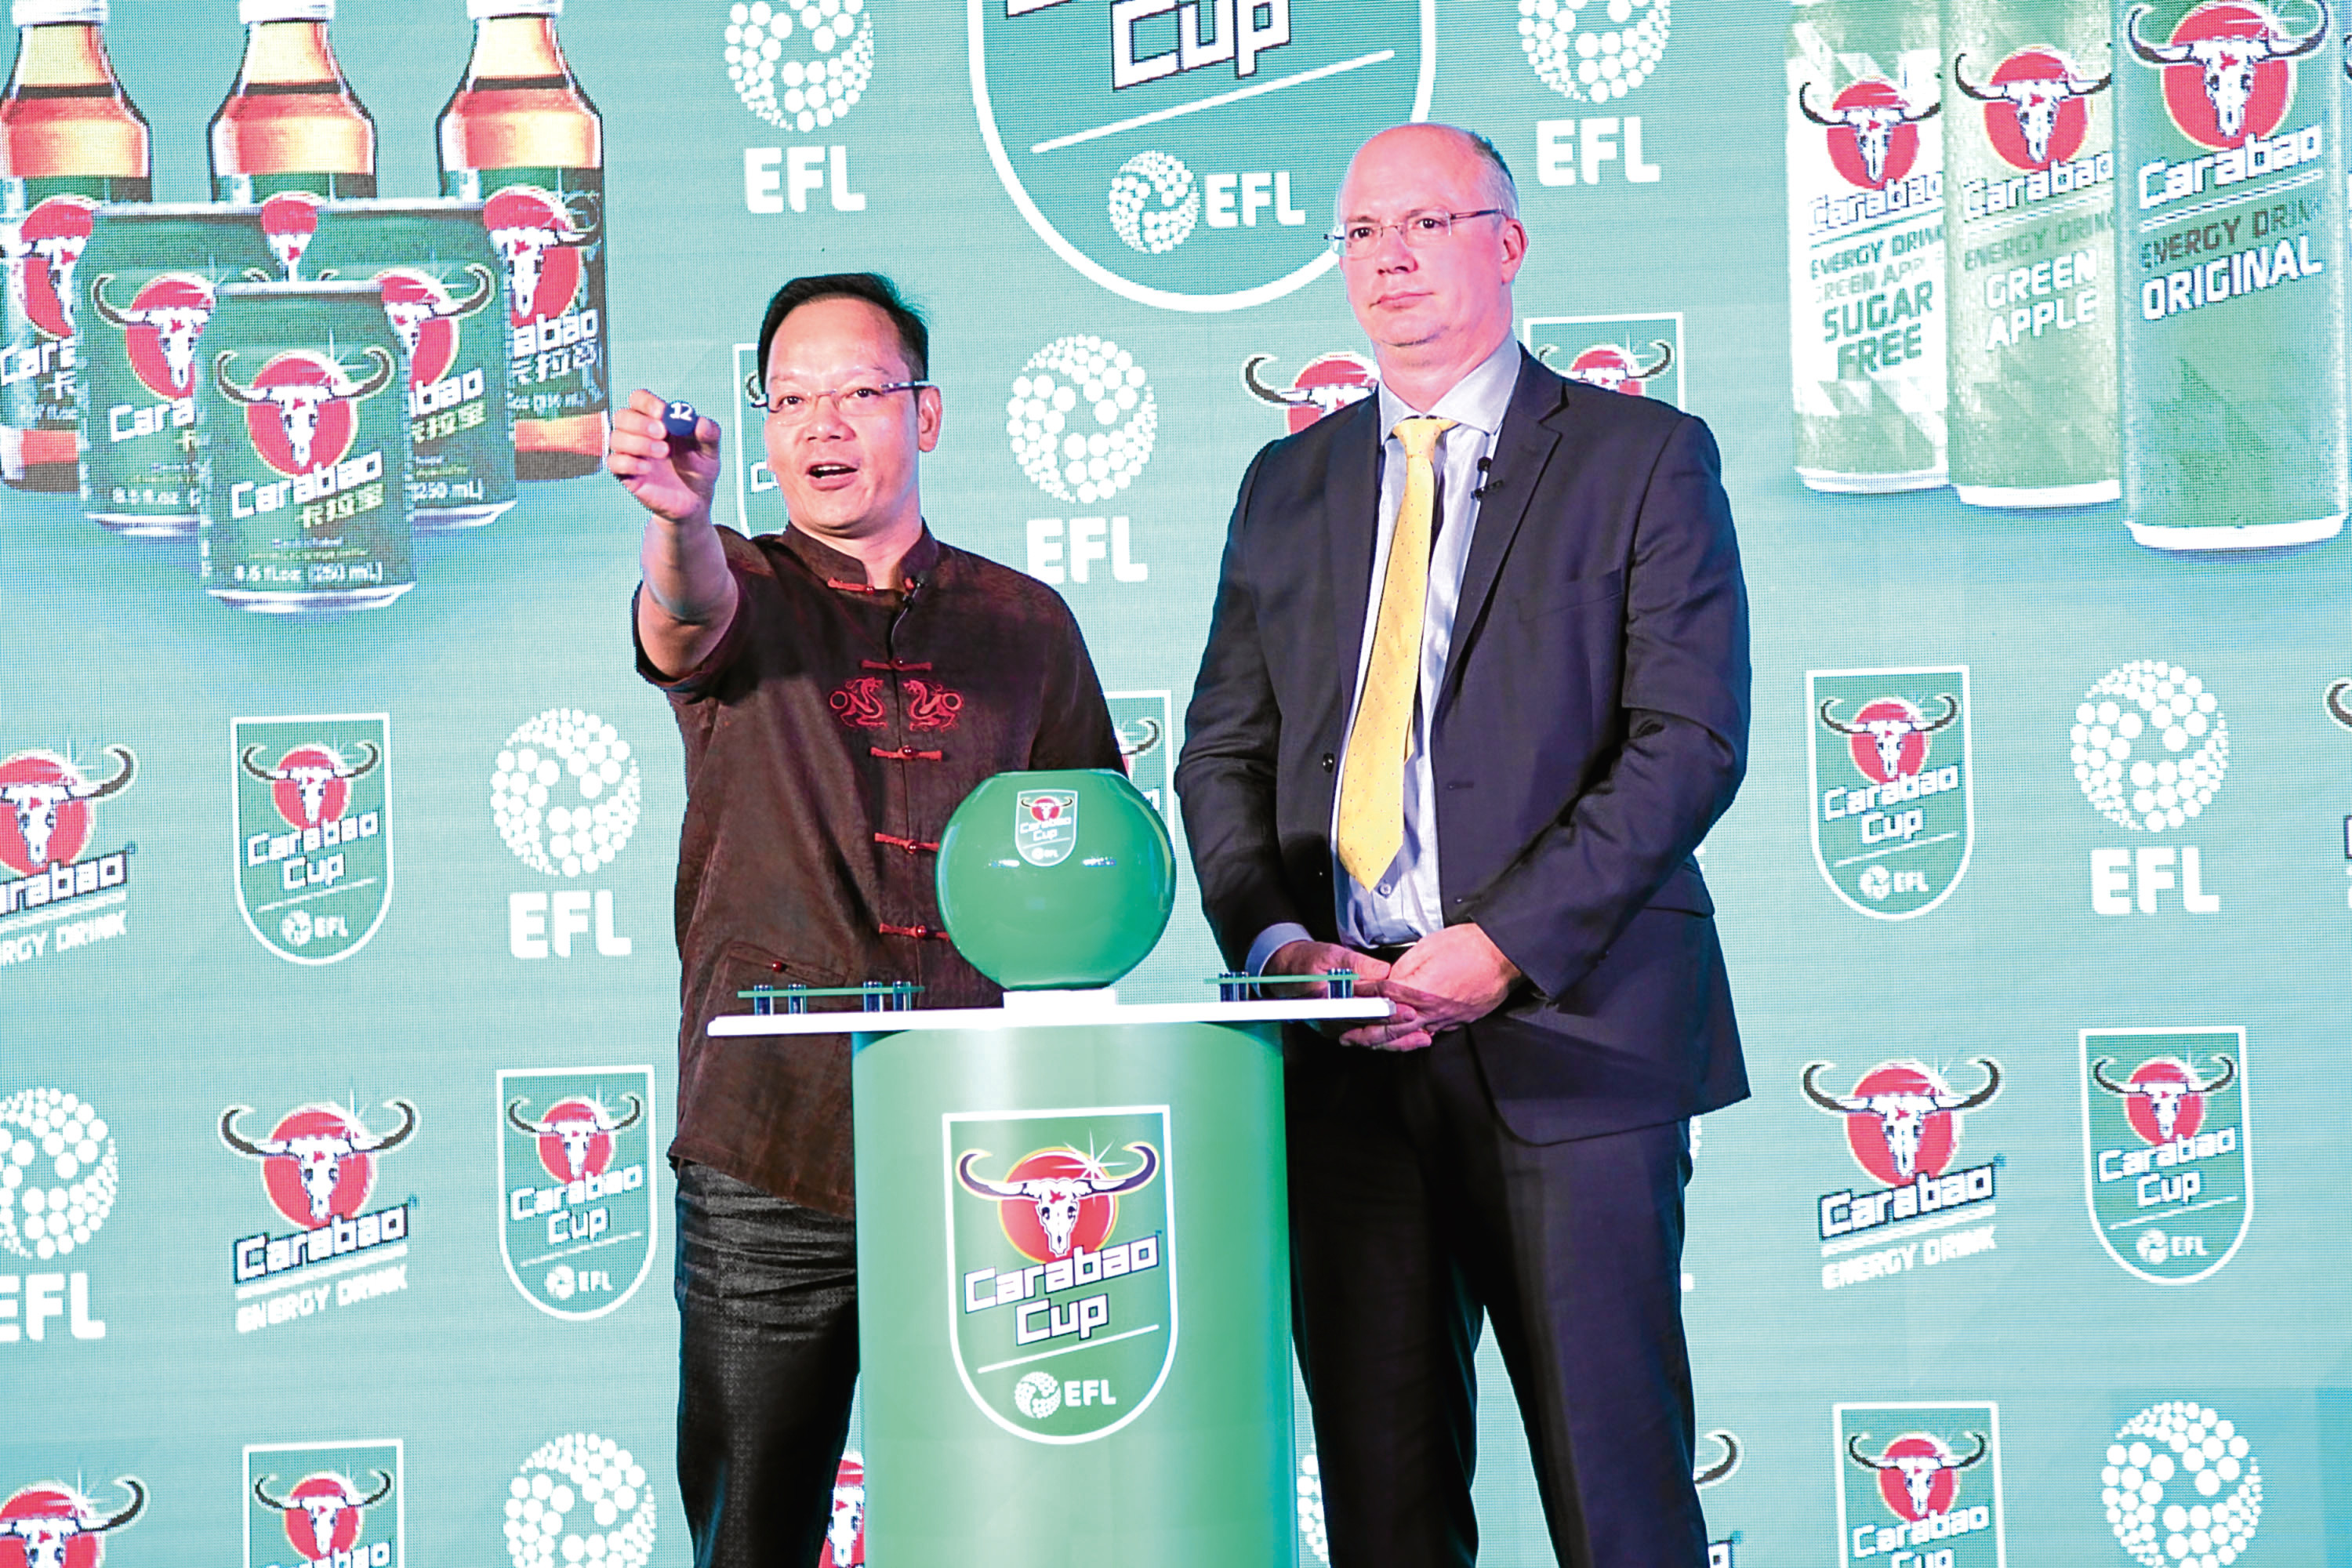 The EFL CEO Shaun Harvey (R) and Carabo China CEO James Huang attend the Rundown for Carabo Press Conference & the Carabo Cup 3rd Round Draw on August 24, 2017 in Beijing, China. (Xiaolu Chu/Getty Images)